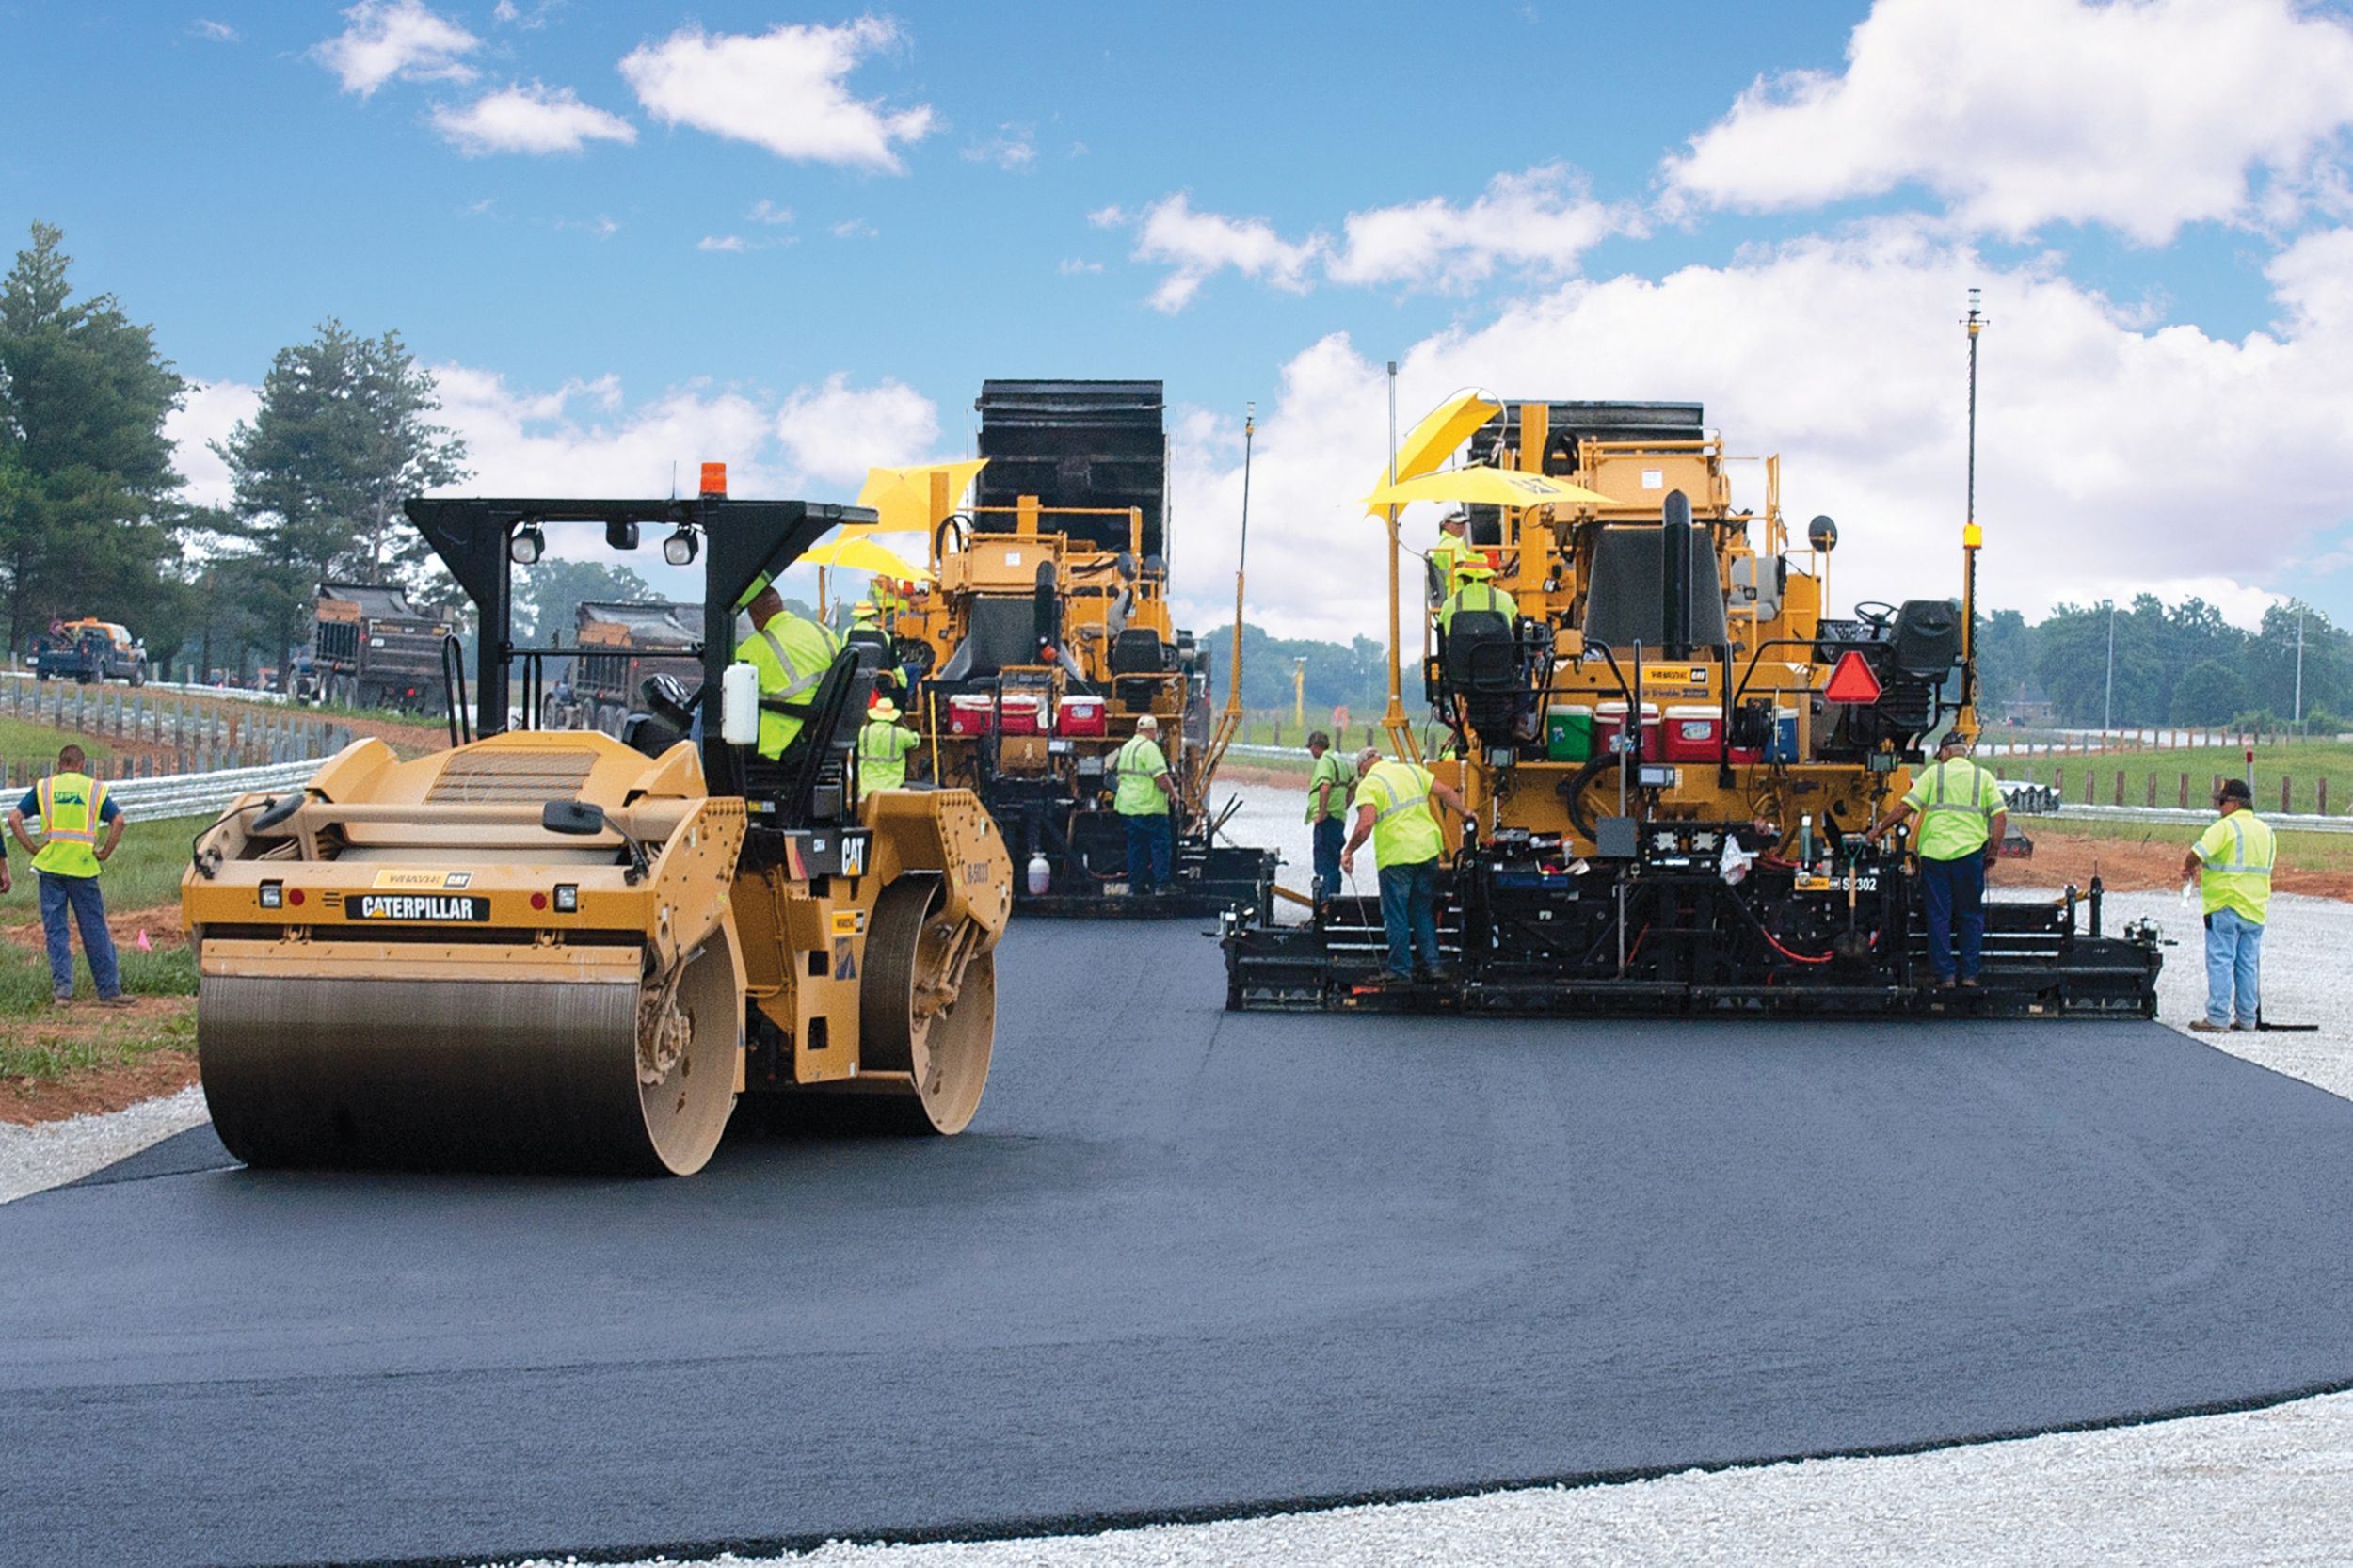 The specifications required echelon paving to eliminate a cold longitudinal joint.